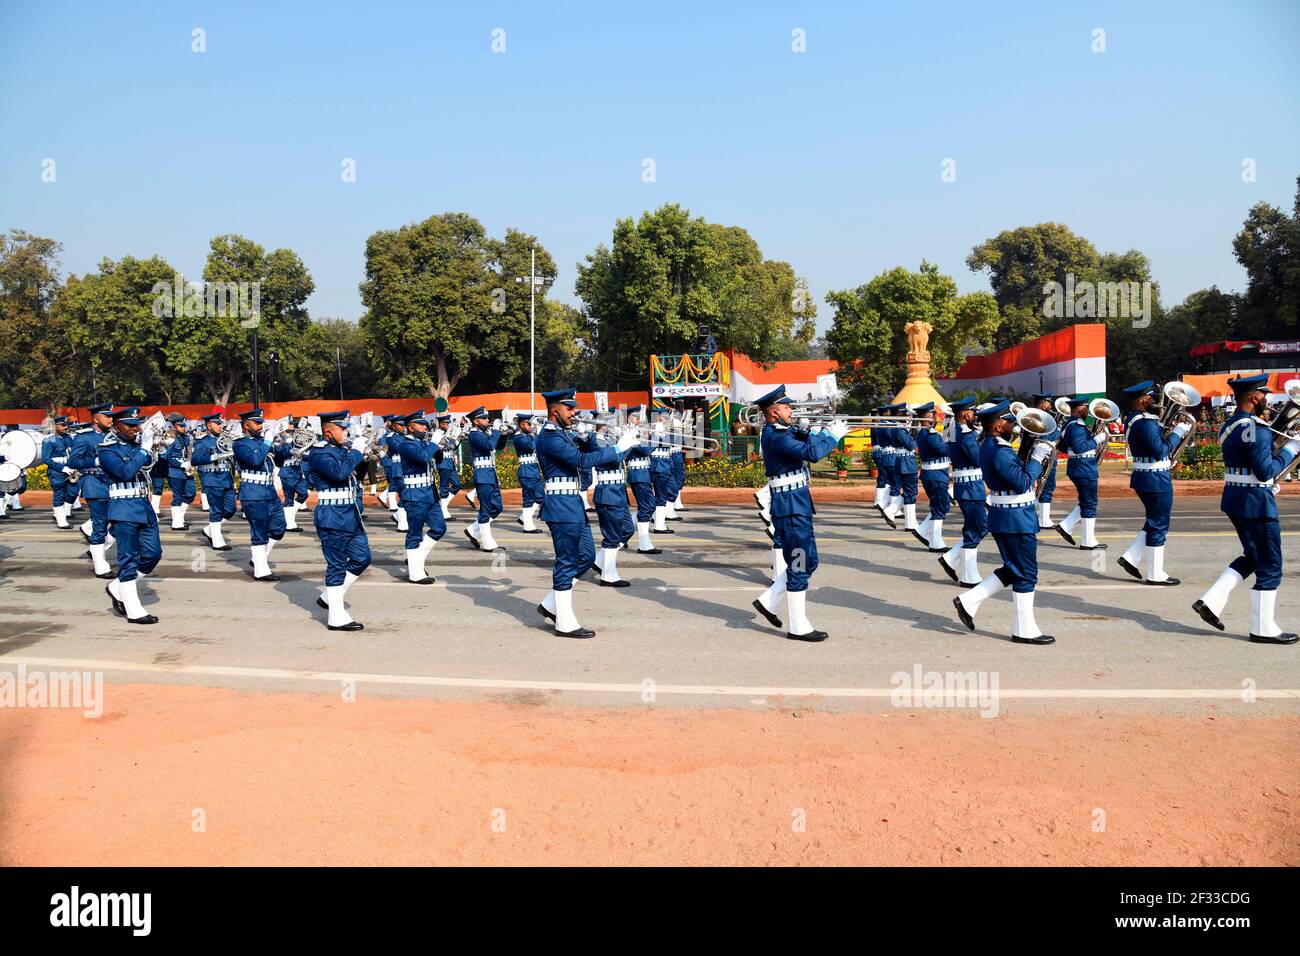 Indian Air force band playing band and marching on 26th January in Delhi on Republic day India Stock Photo